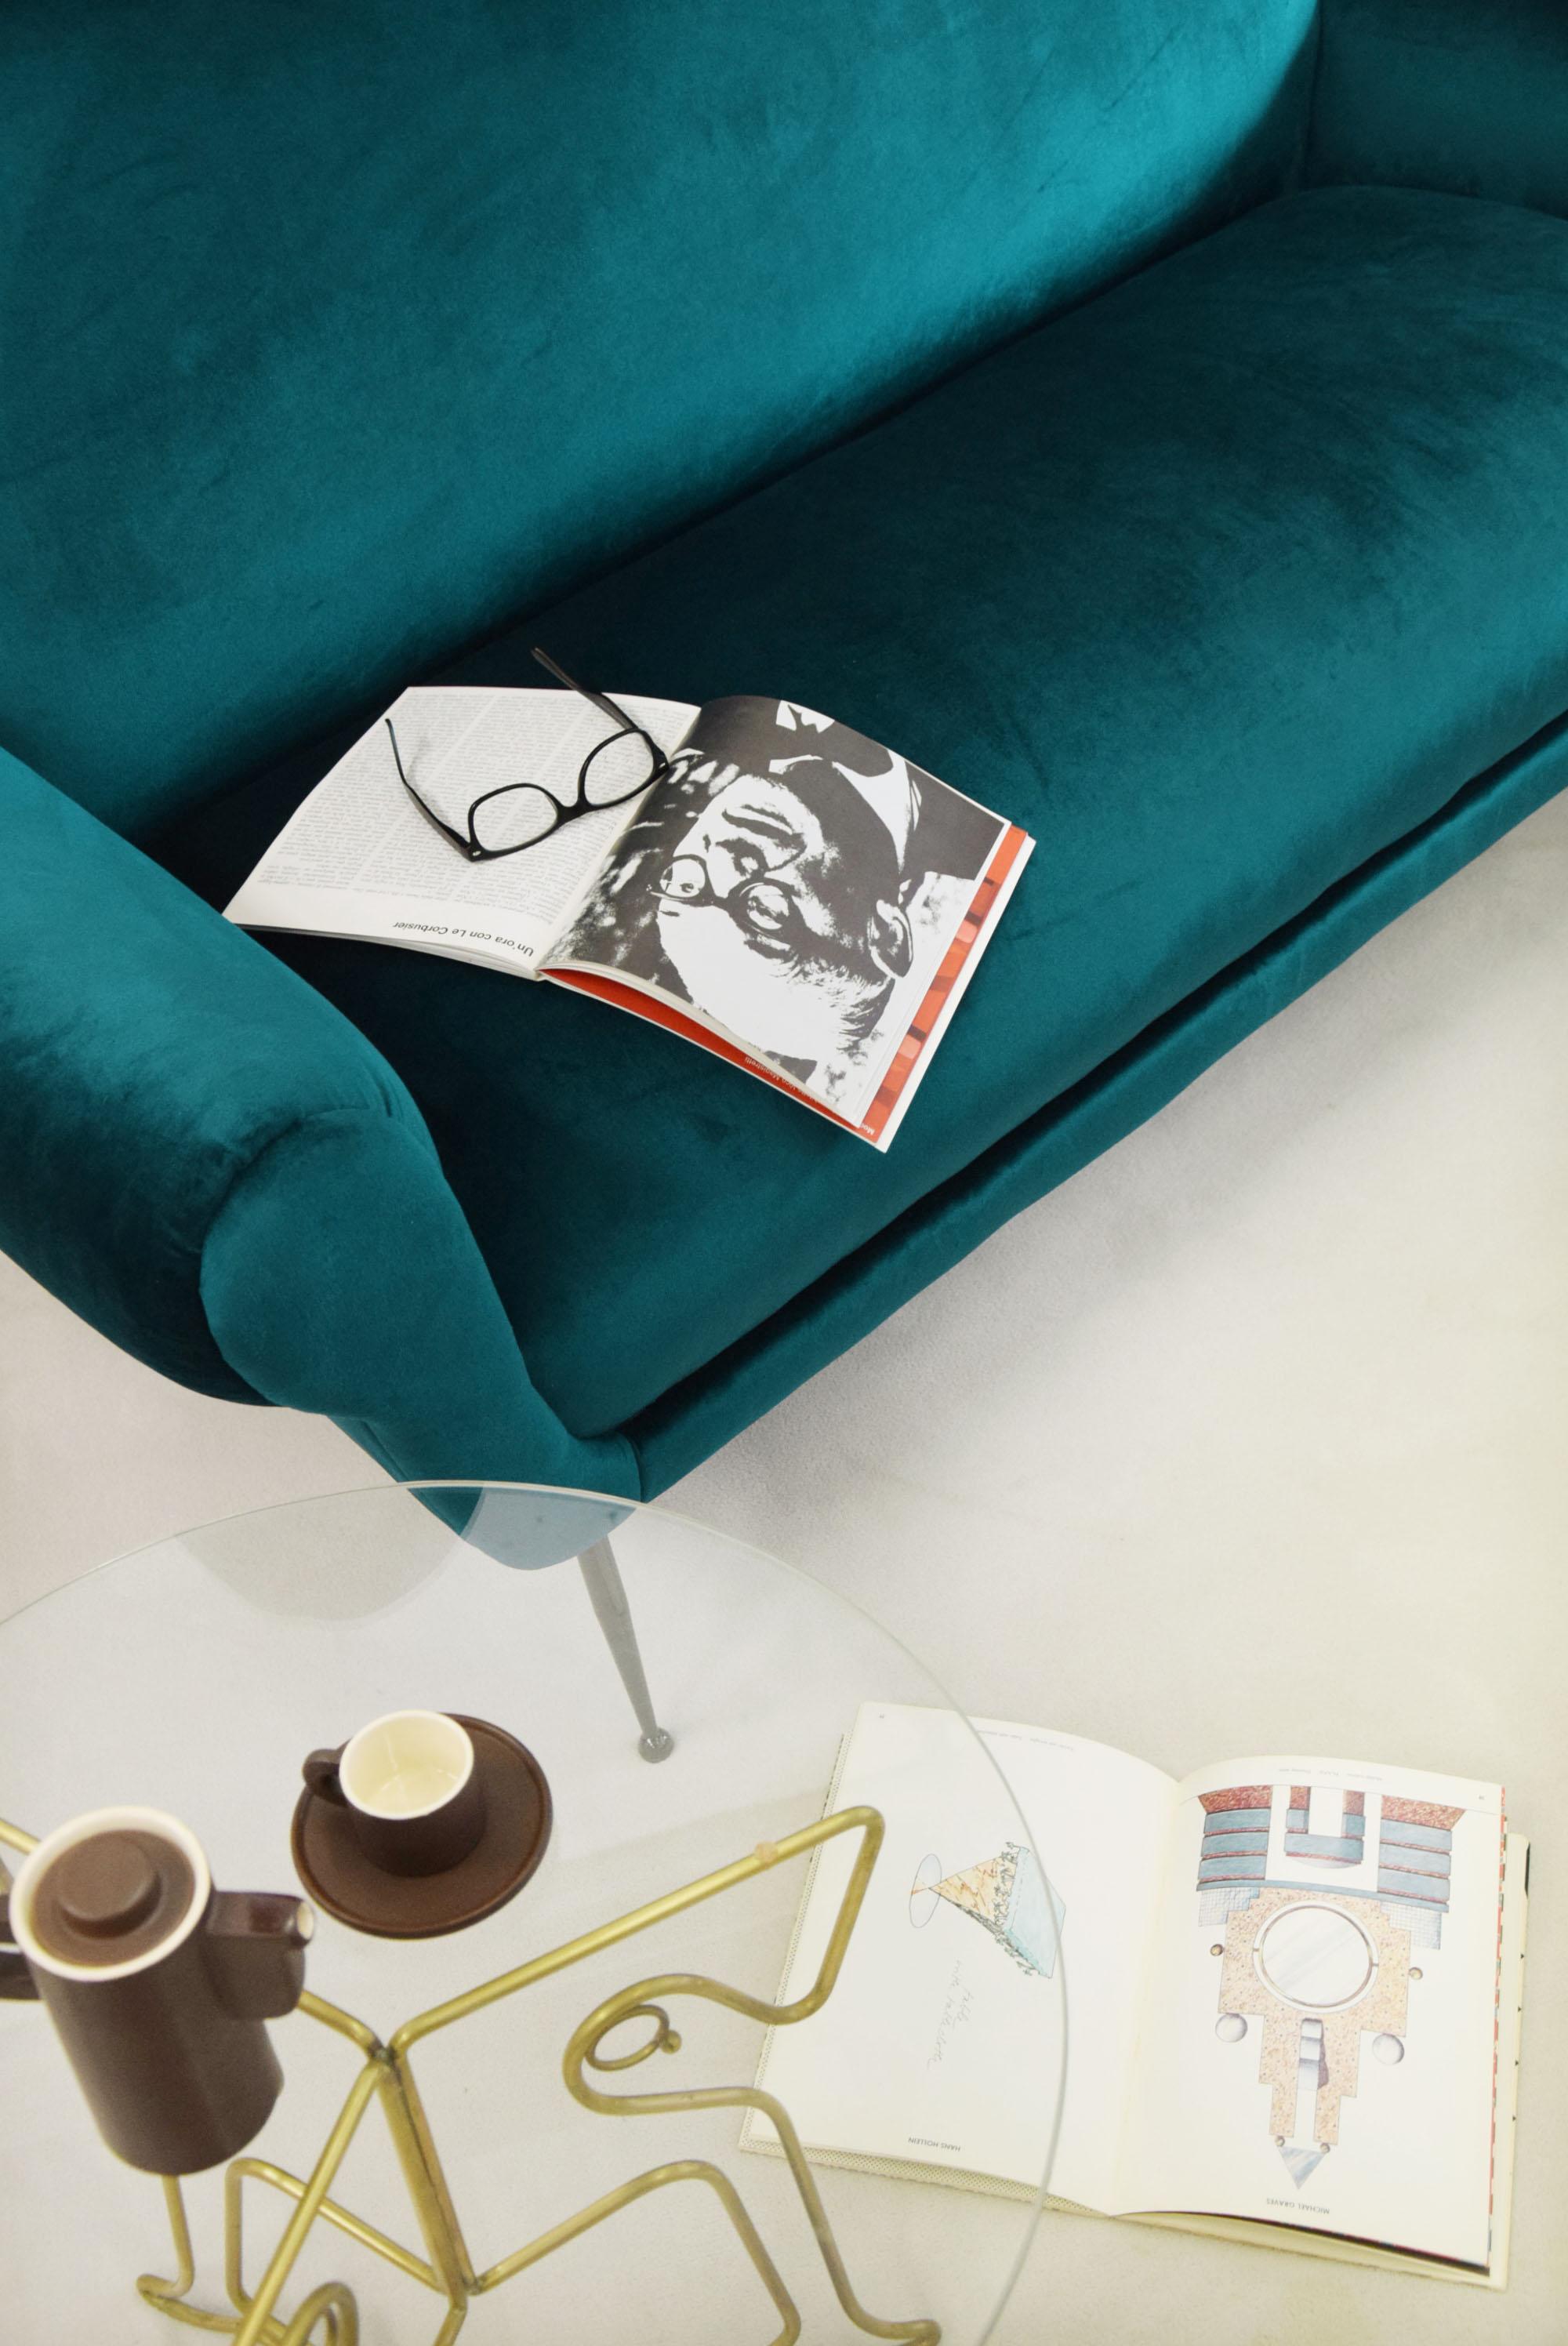 Turquoise Gigi Radice Mid-Century Modern Minotti sofa.
Gorgeous and very elegant Albert & Ile sofa designed by Gigi Radice in the 1950's and are thought as a tribute to Alberto, the founder of the company who died in 1991, and Ileana, his wife,